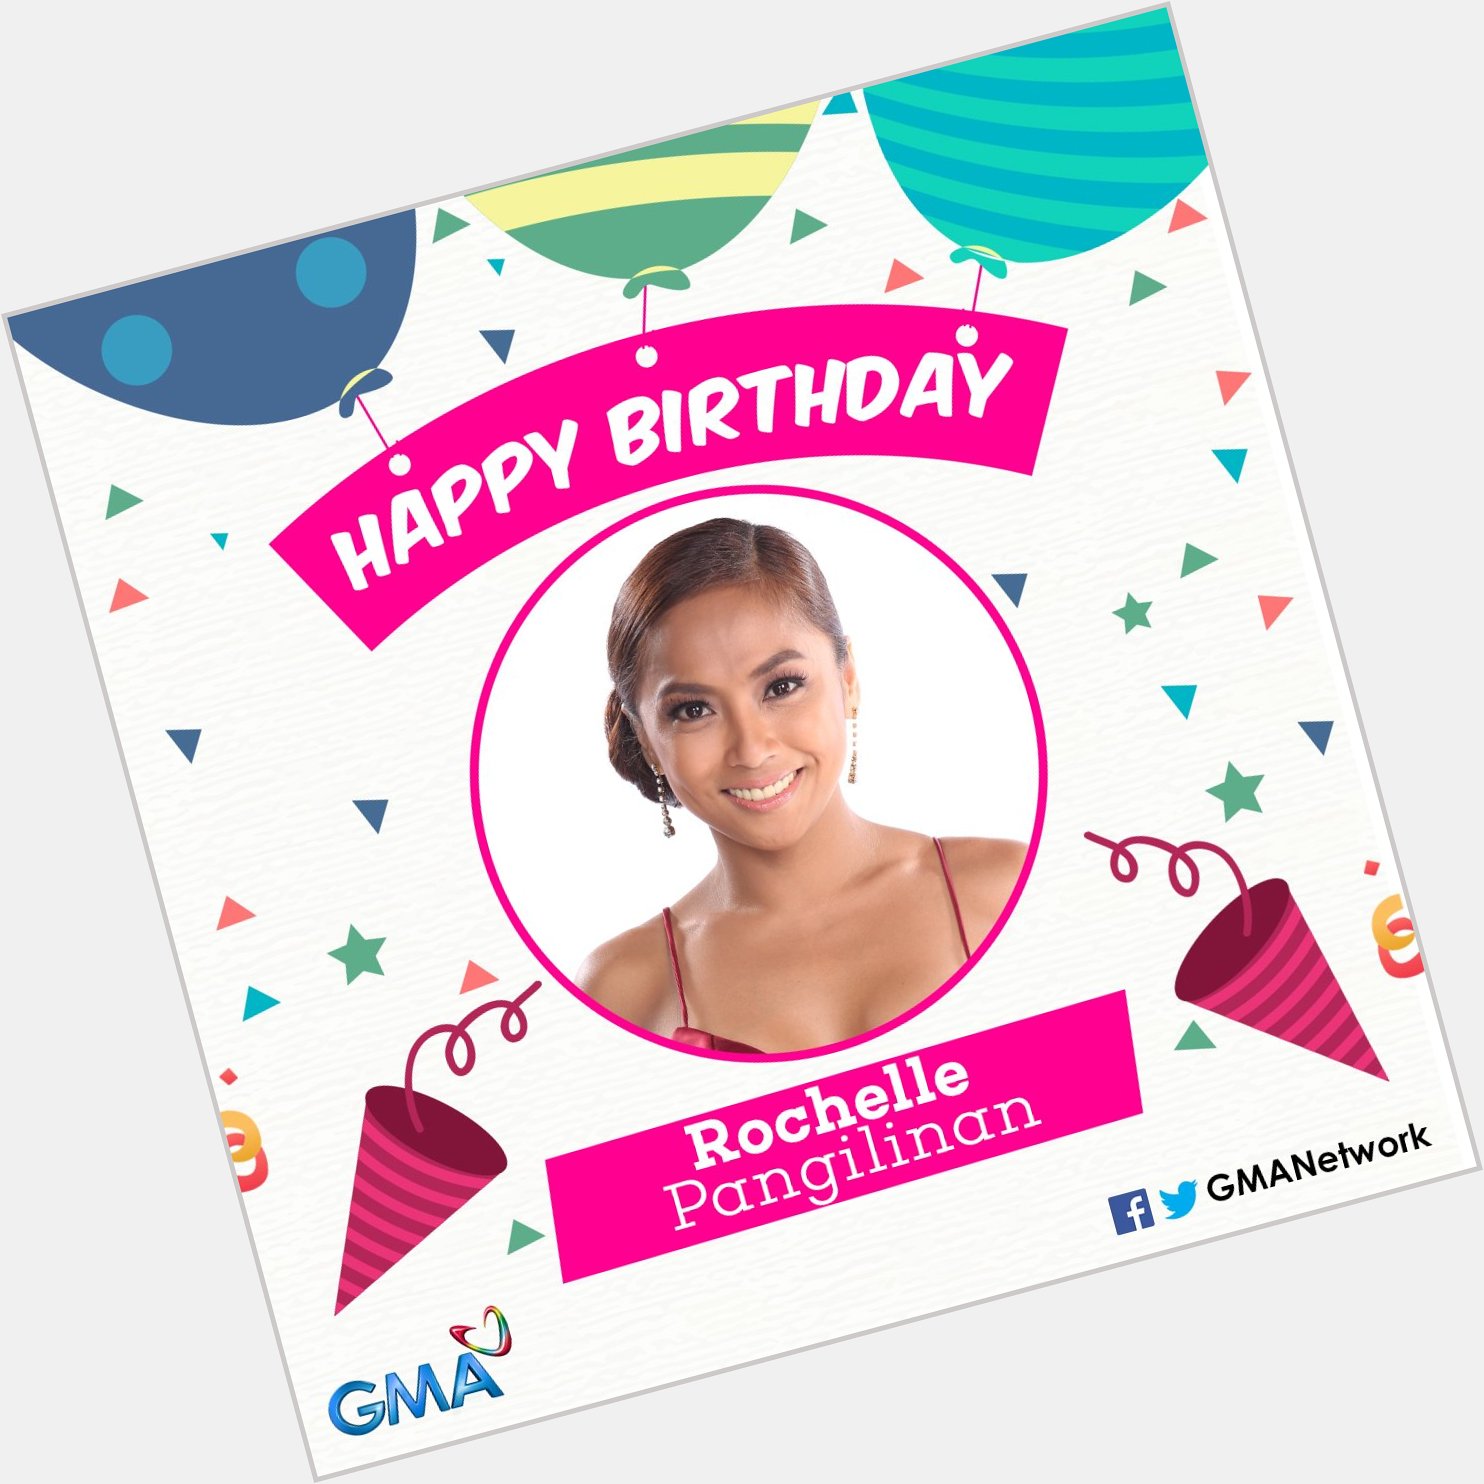 Happy Birthday to our very own, Rochelle Pangilinan I_am_ROC08 more projects to come. God bless Kapuso! ©  KapusoUp 